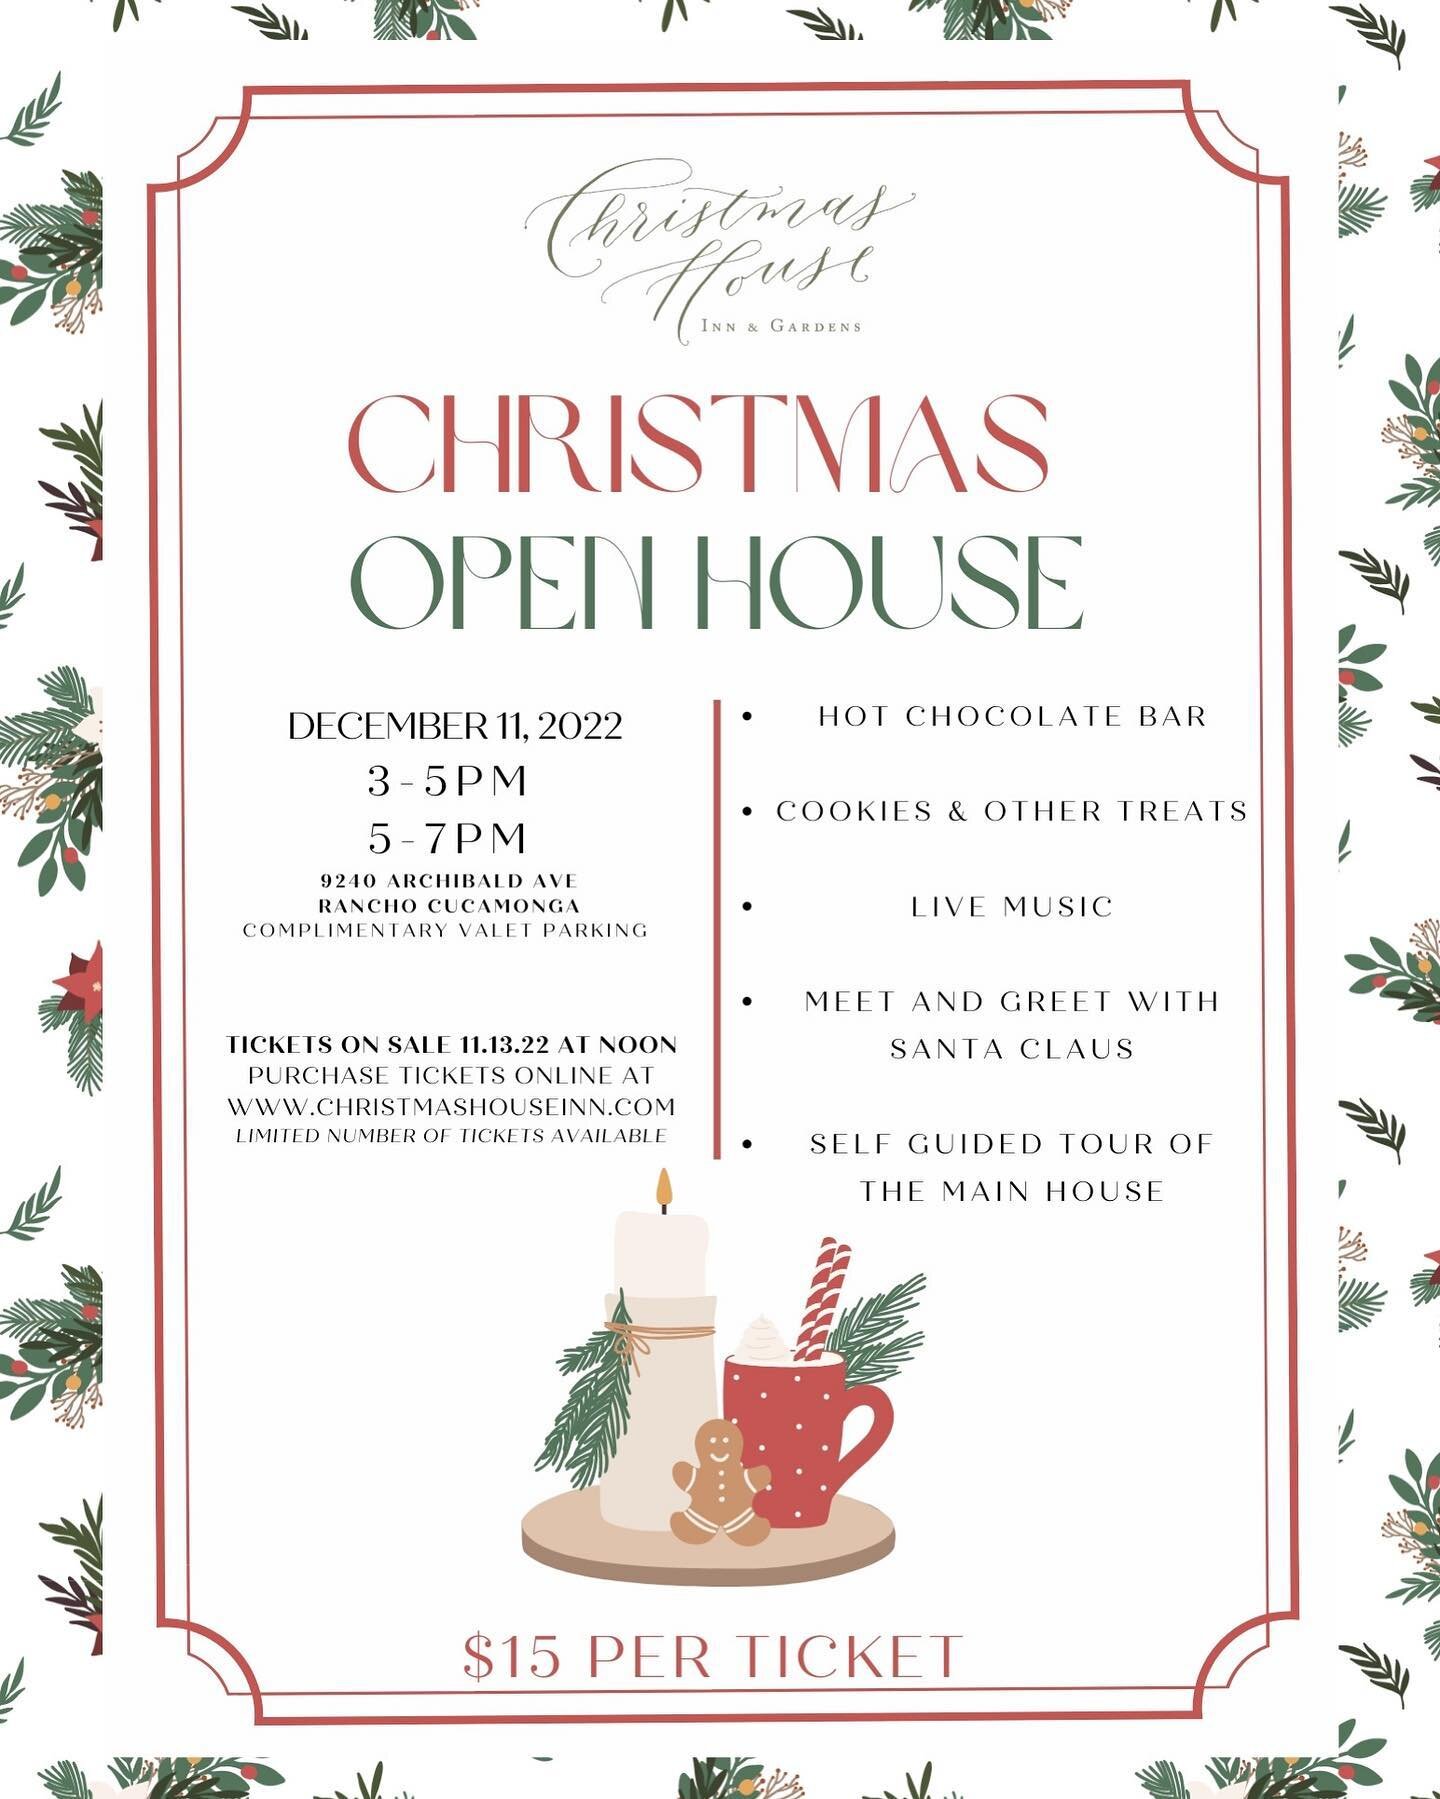 We are super excited to announce our 2022 Christmas Open House!! 
🎅🏻
Tickets go on sale this Sunday, November 13th at noon Pacific time and can be purchased on our website www.christmashouseinn.com 
Tickets are $15 and spaces are limited. 
🎄
We lo